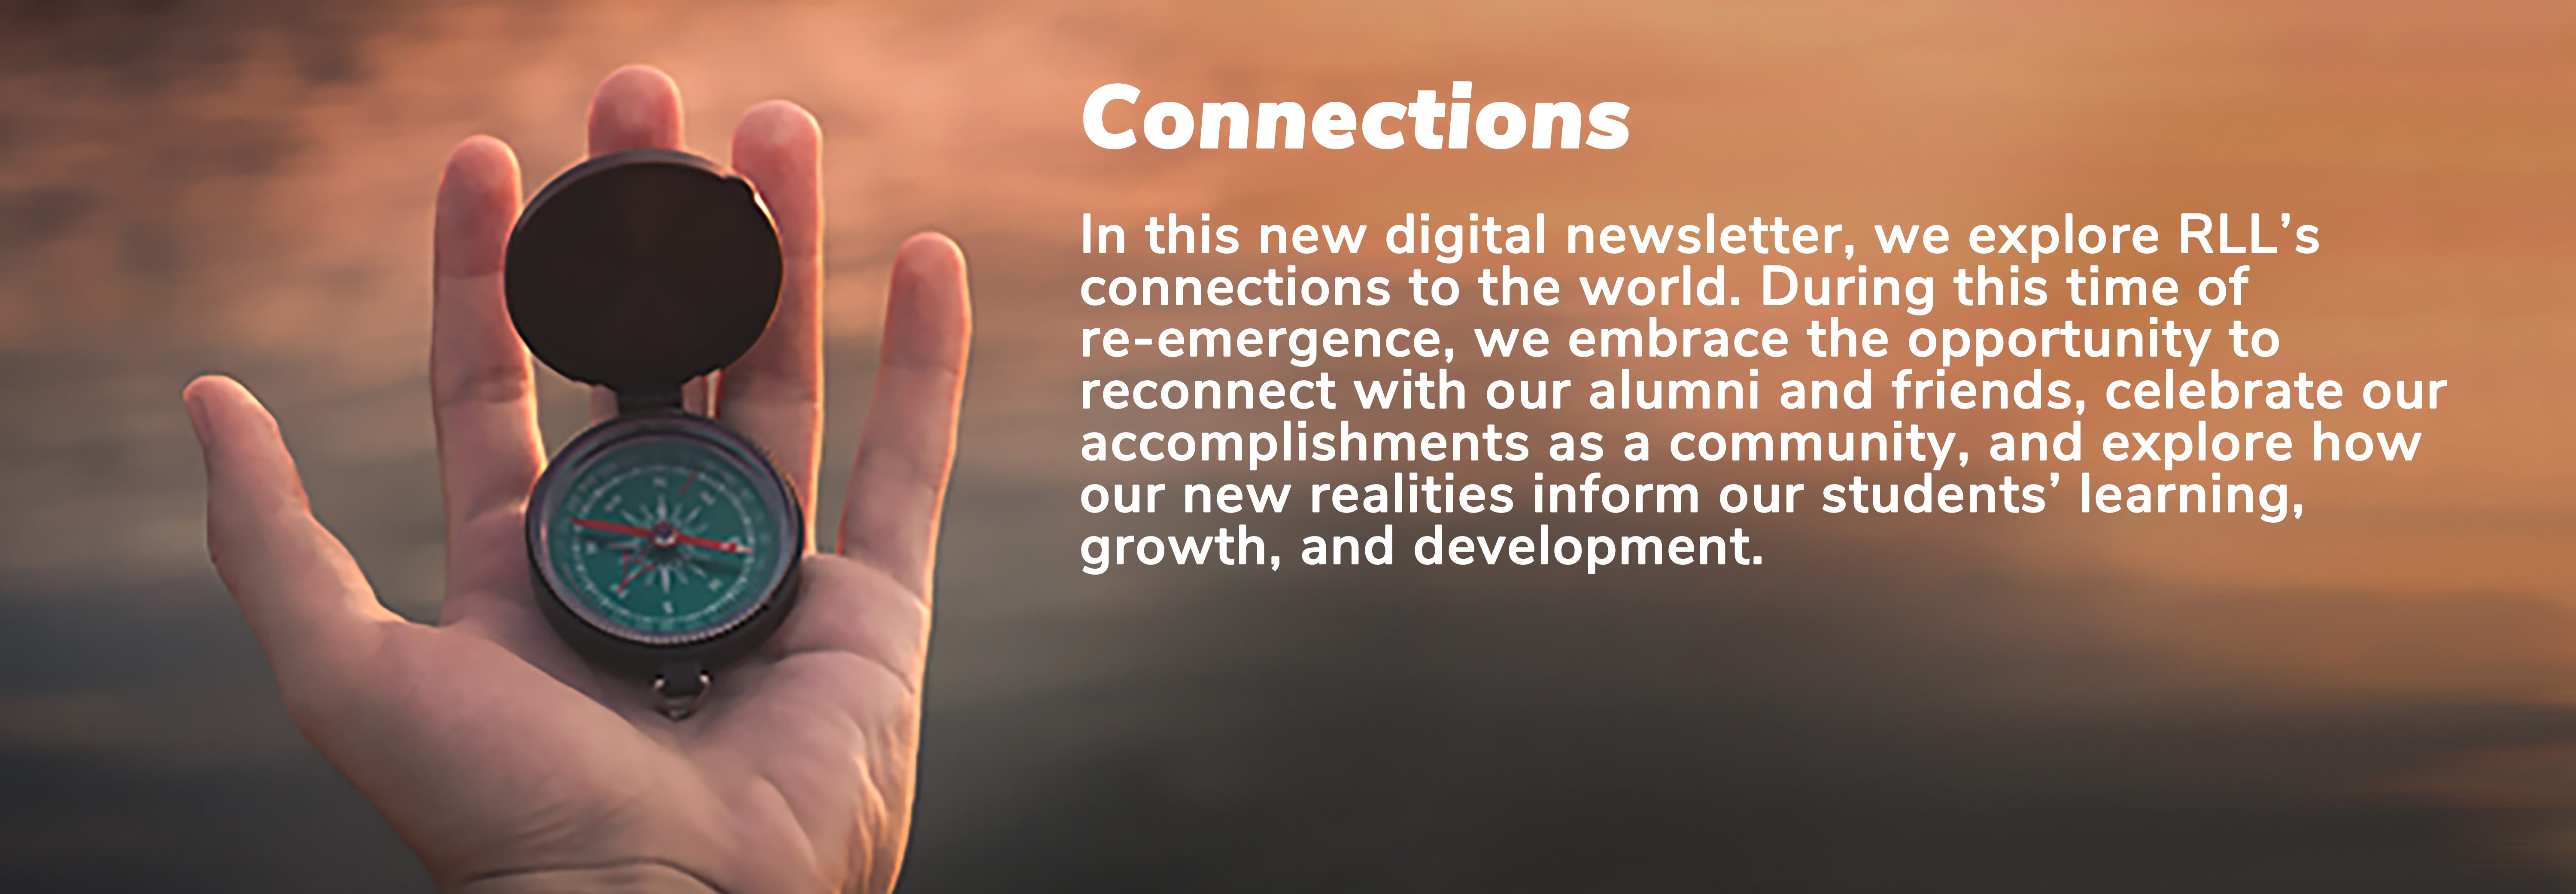 Connections: In this new digital newsletter, we explore RLL’s connections to the world. During this time of re-emergence, we embrace the opportunity to reconnect with our alumni and friends, celebrate our accomplishments as a community, and explore how our new realities inform our students’ learning, growth, and development. 